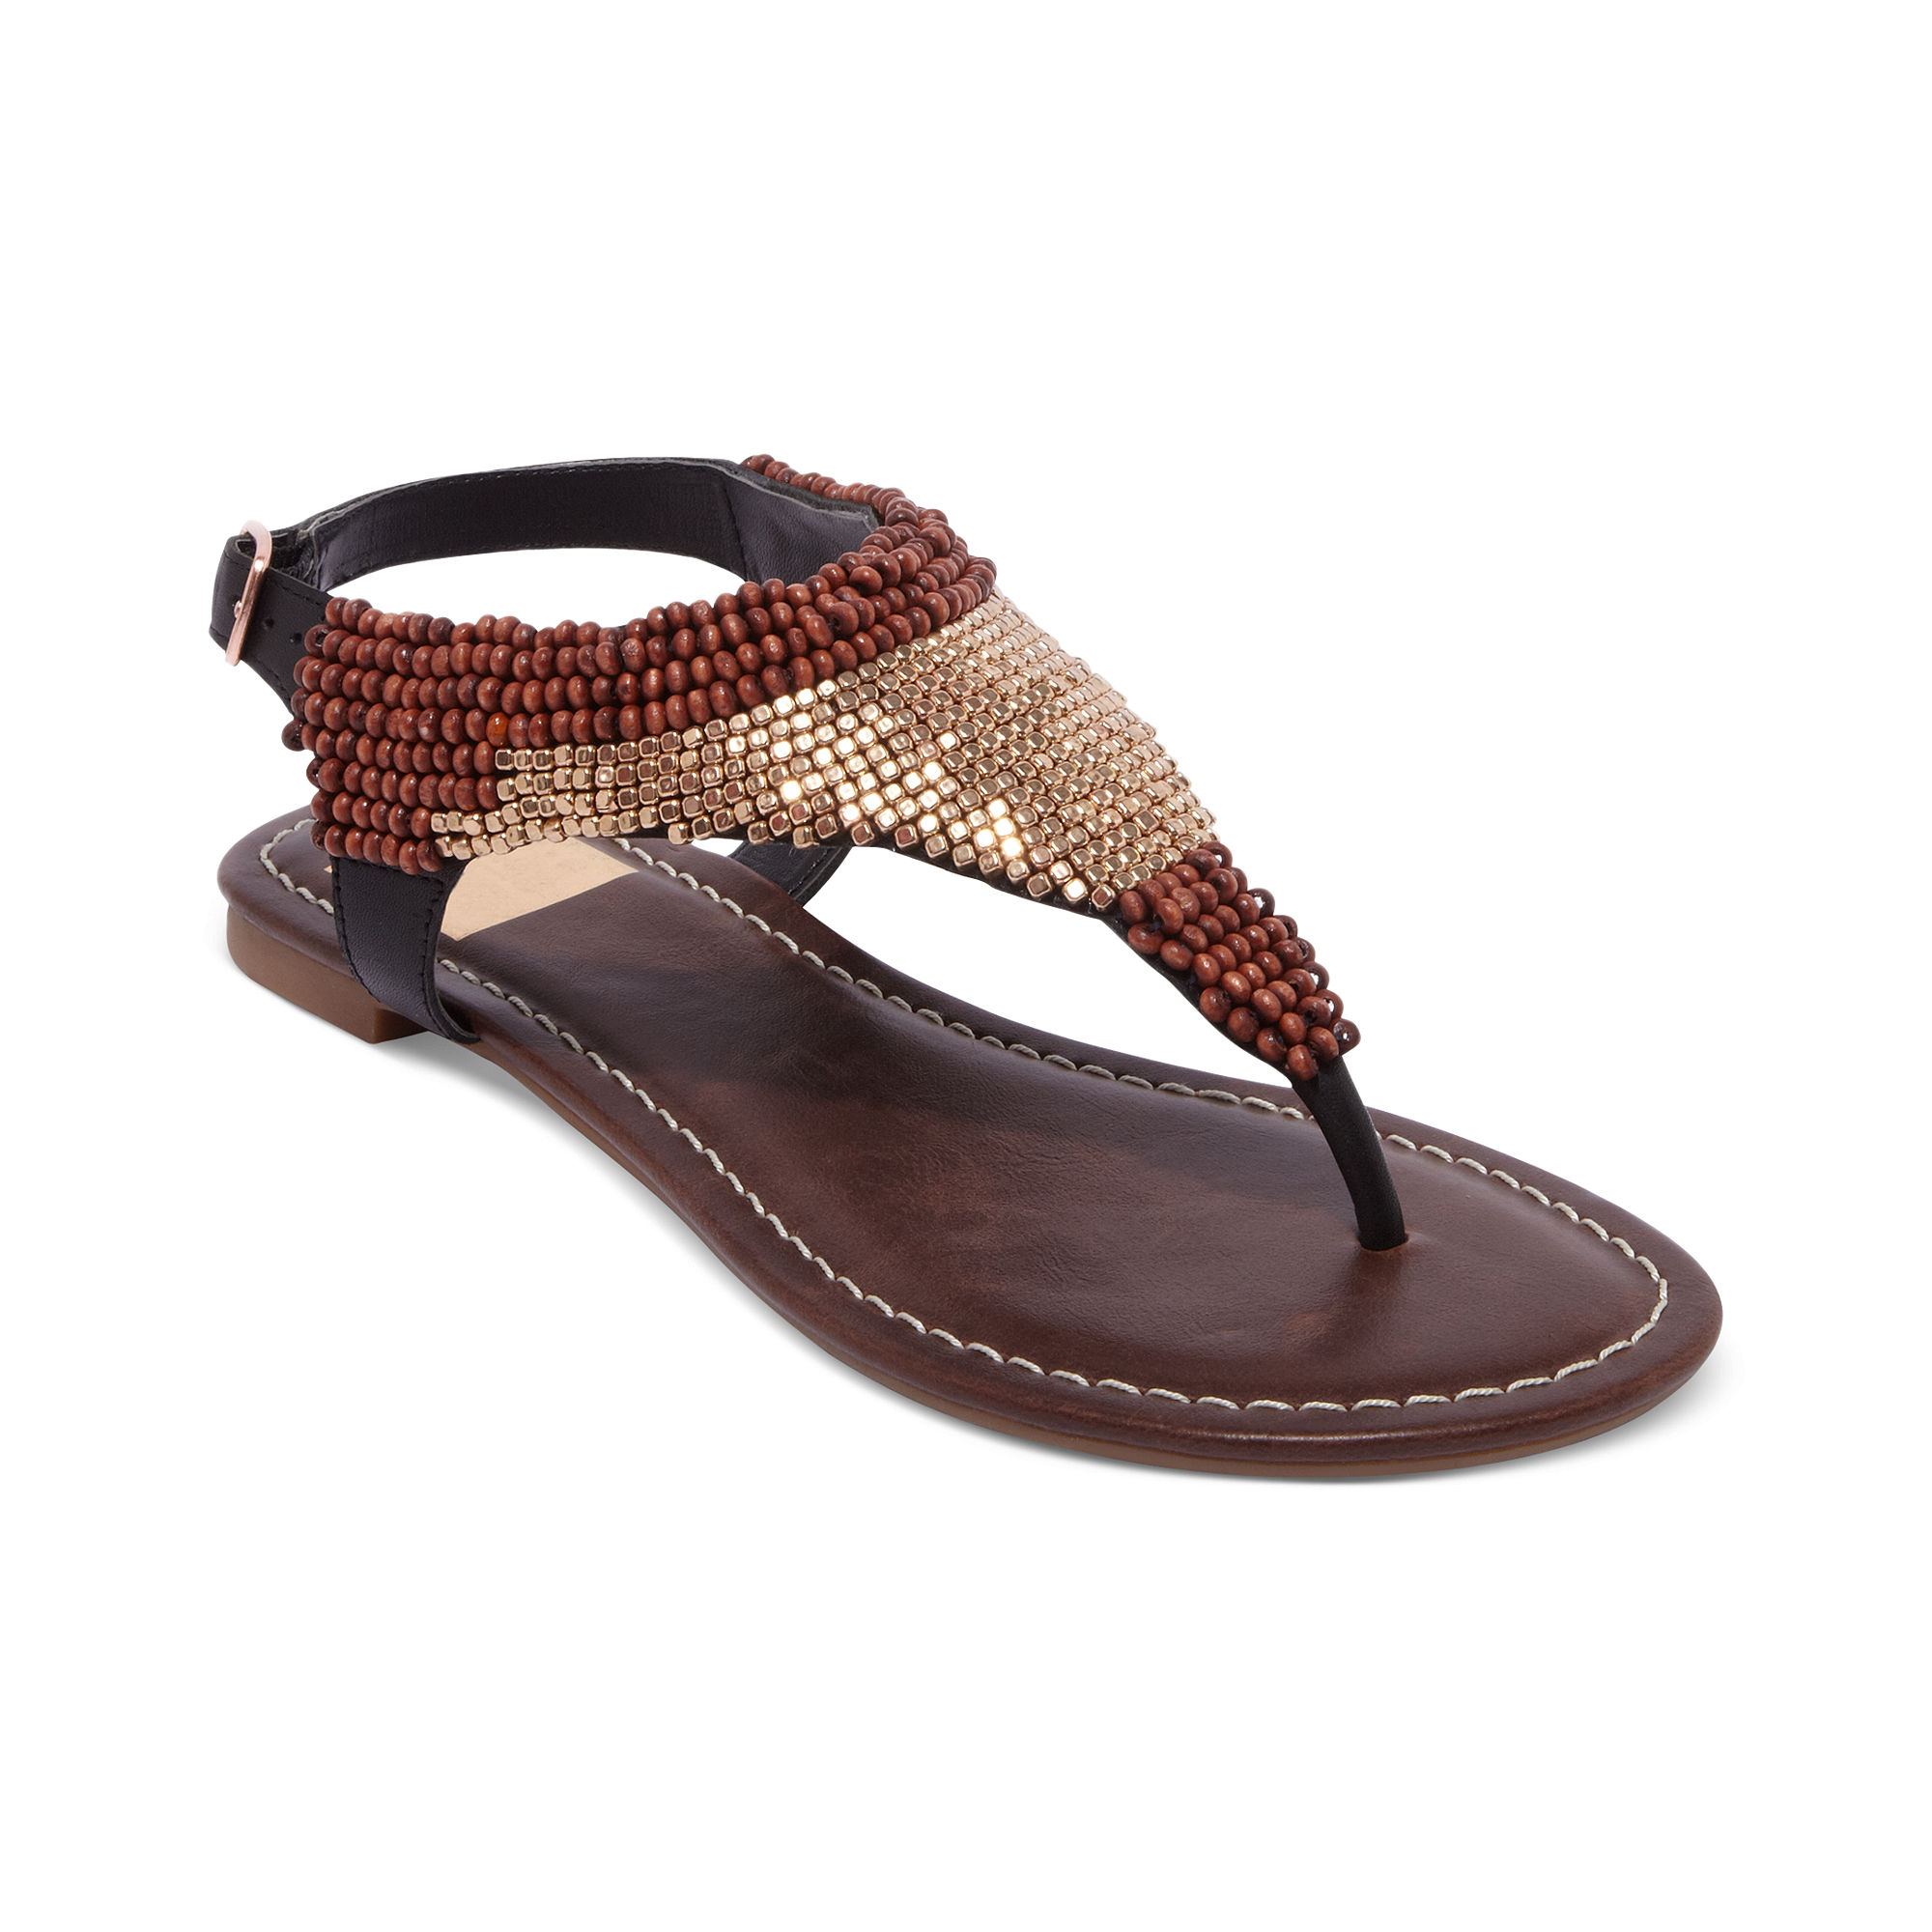 Lyst - Dolce Vita Delancey Beaded Flat Thong Sandals in Brown